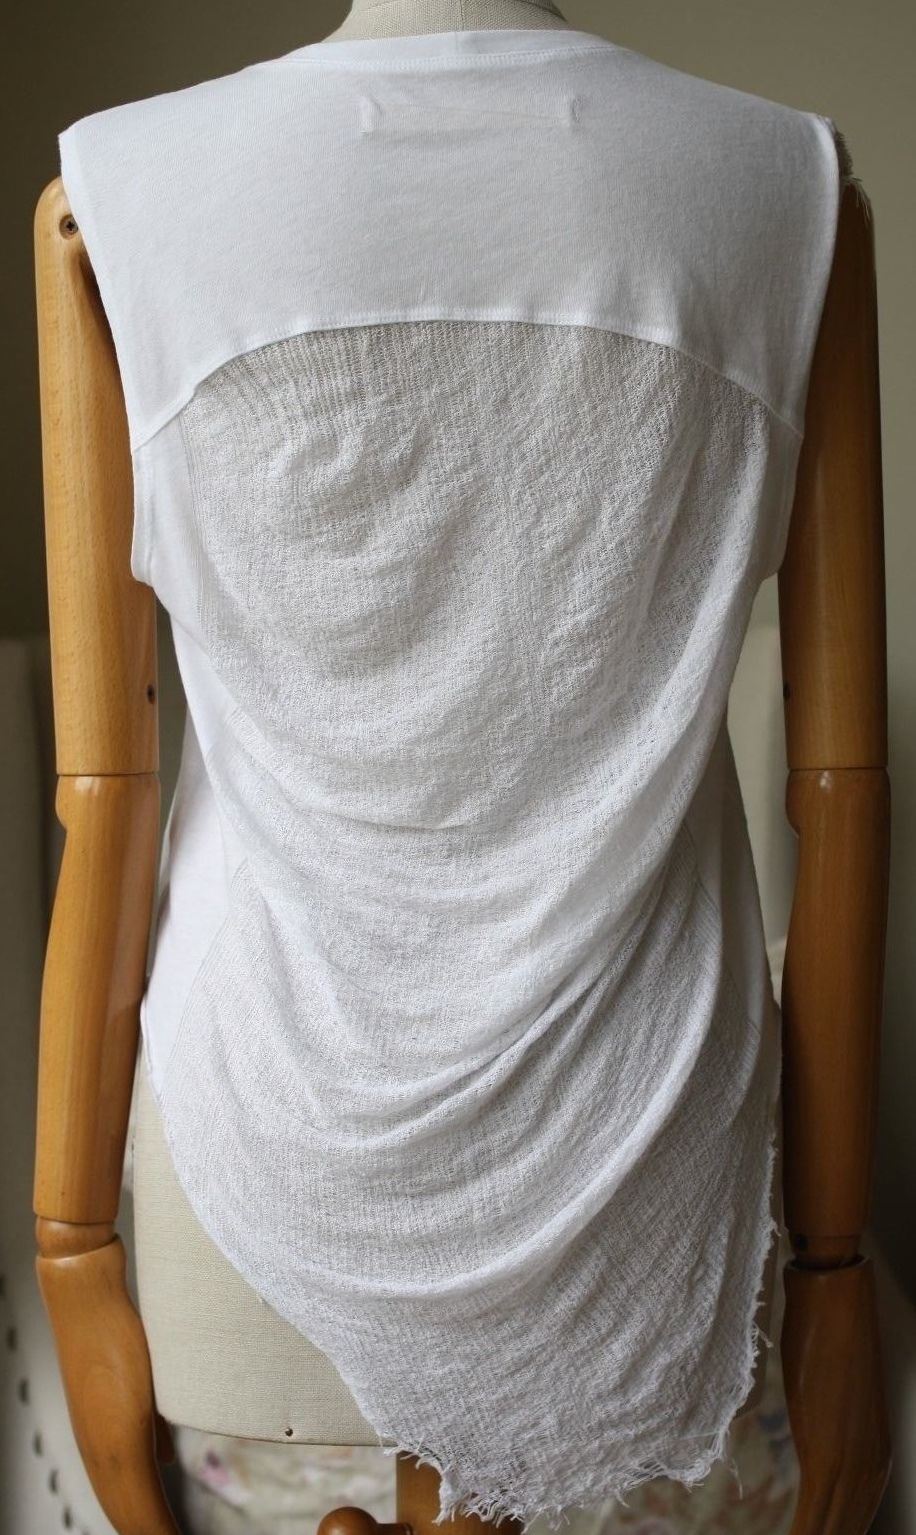 RAQUEL ALLEGRA SLEEVELESS MUSCLE TOP WITH SHREDDED BACK 0 UK 6/8